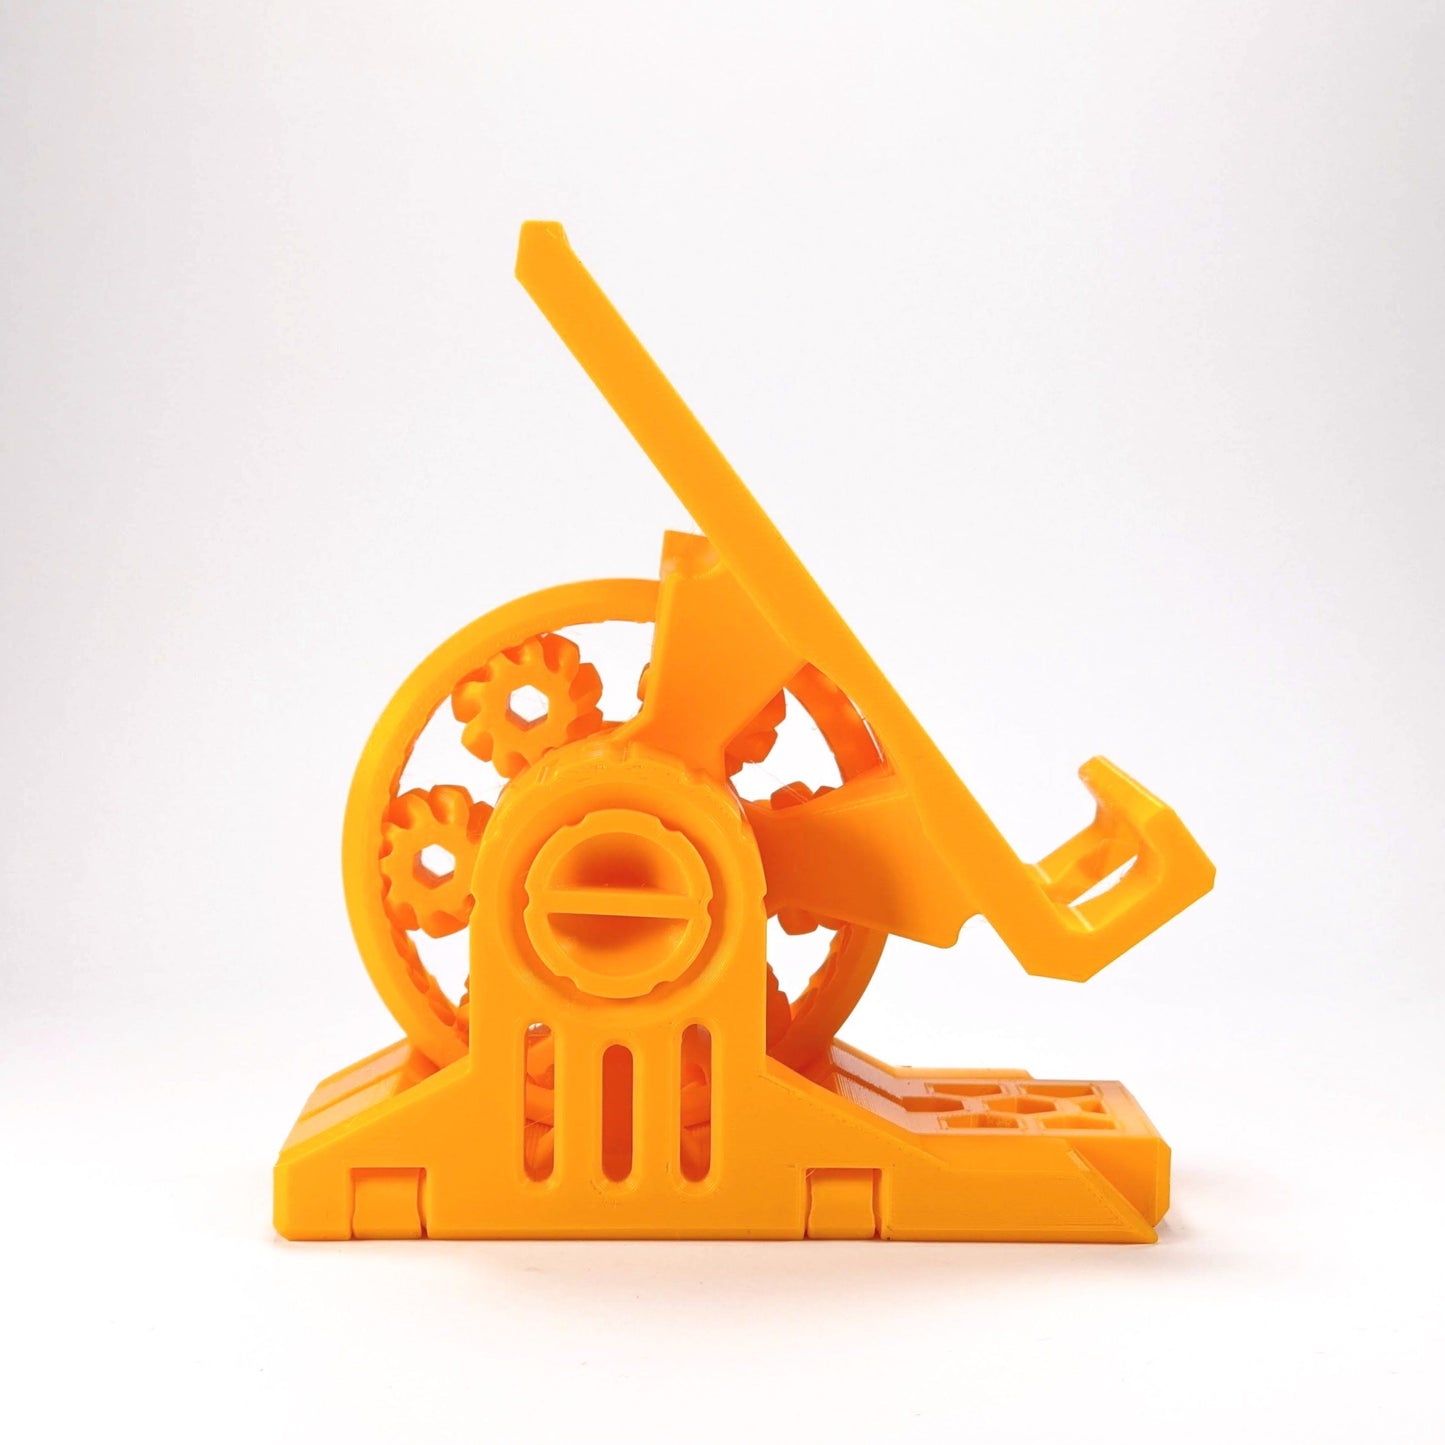 Planetary Phone Stand Clockspring3d Phone Stand Border3d 